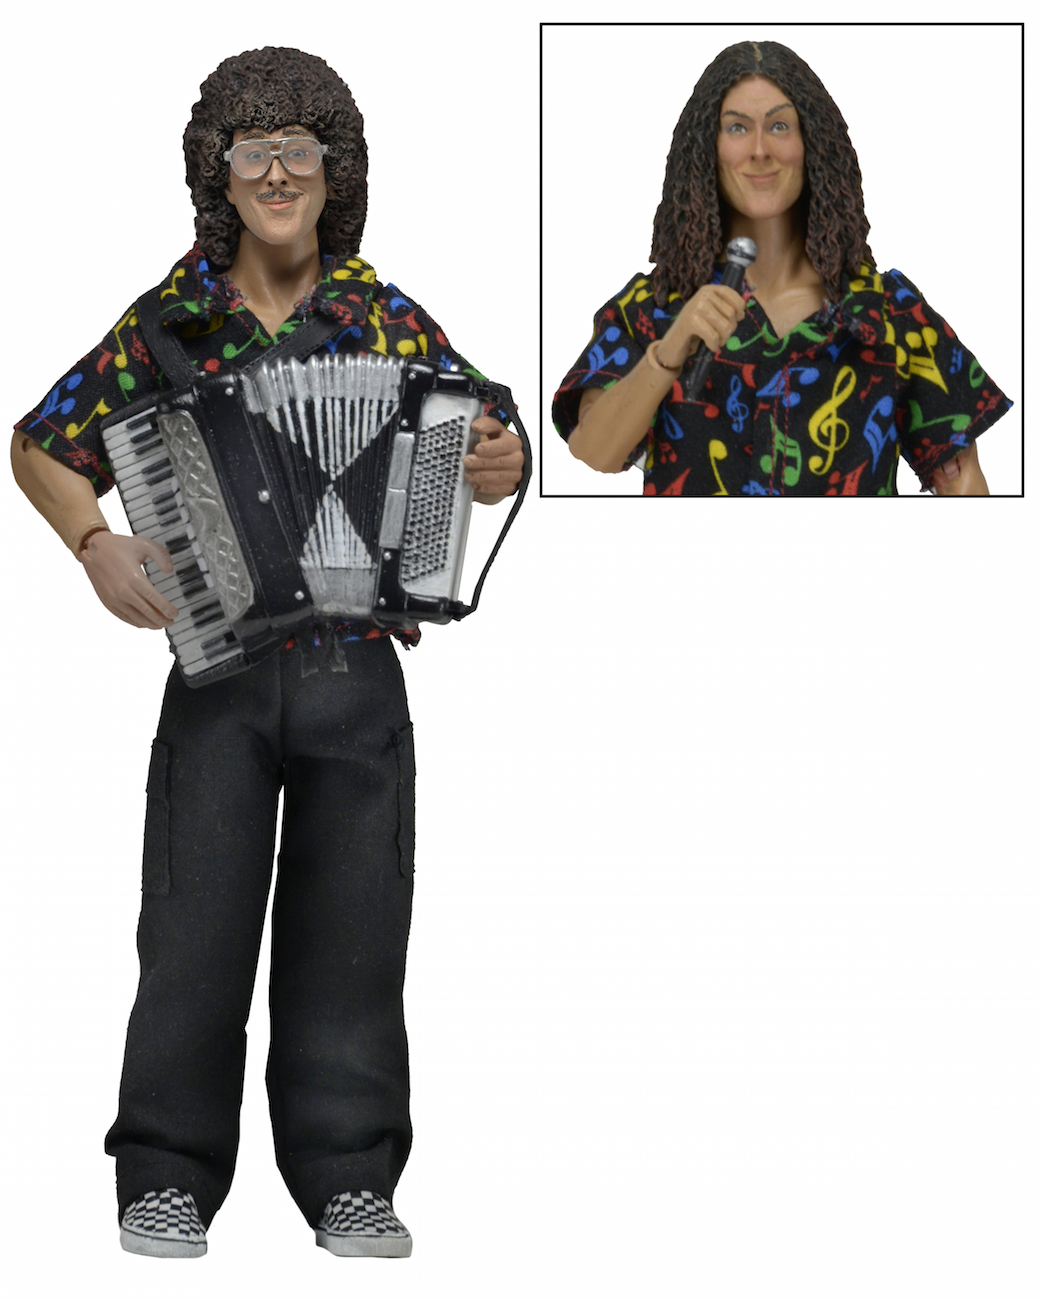 NECAOnline.com | SOLD OUT - "Weird Al" Yankovic - Clothed 8” Action Figure